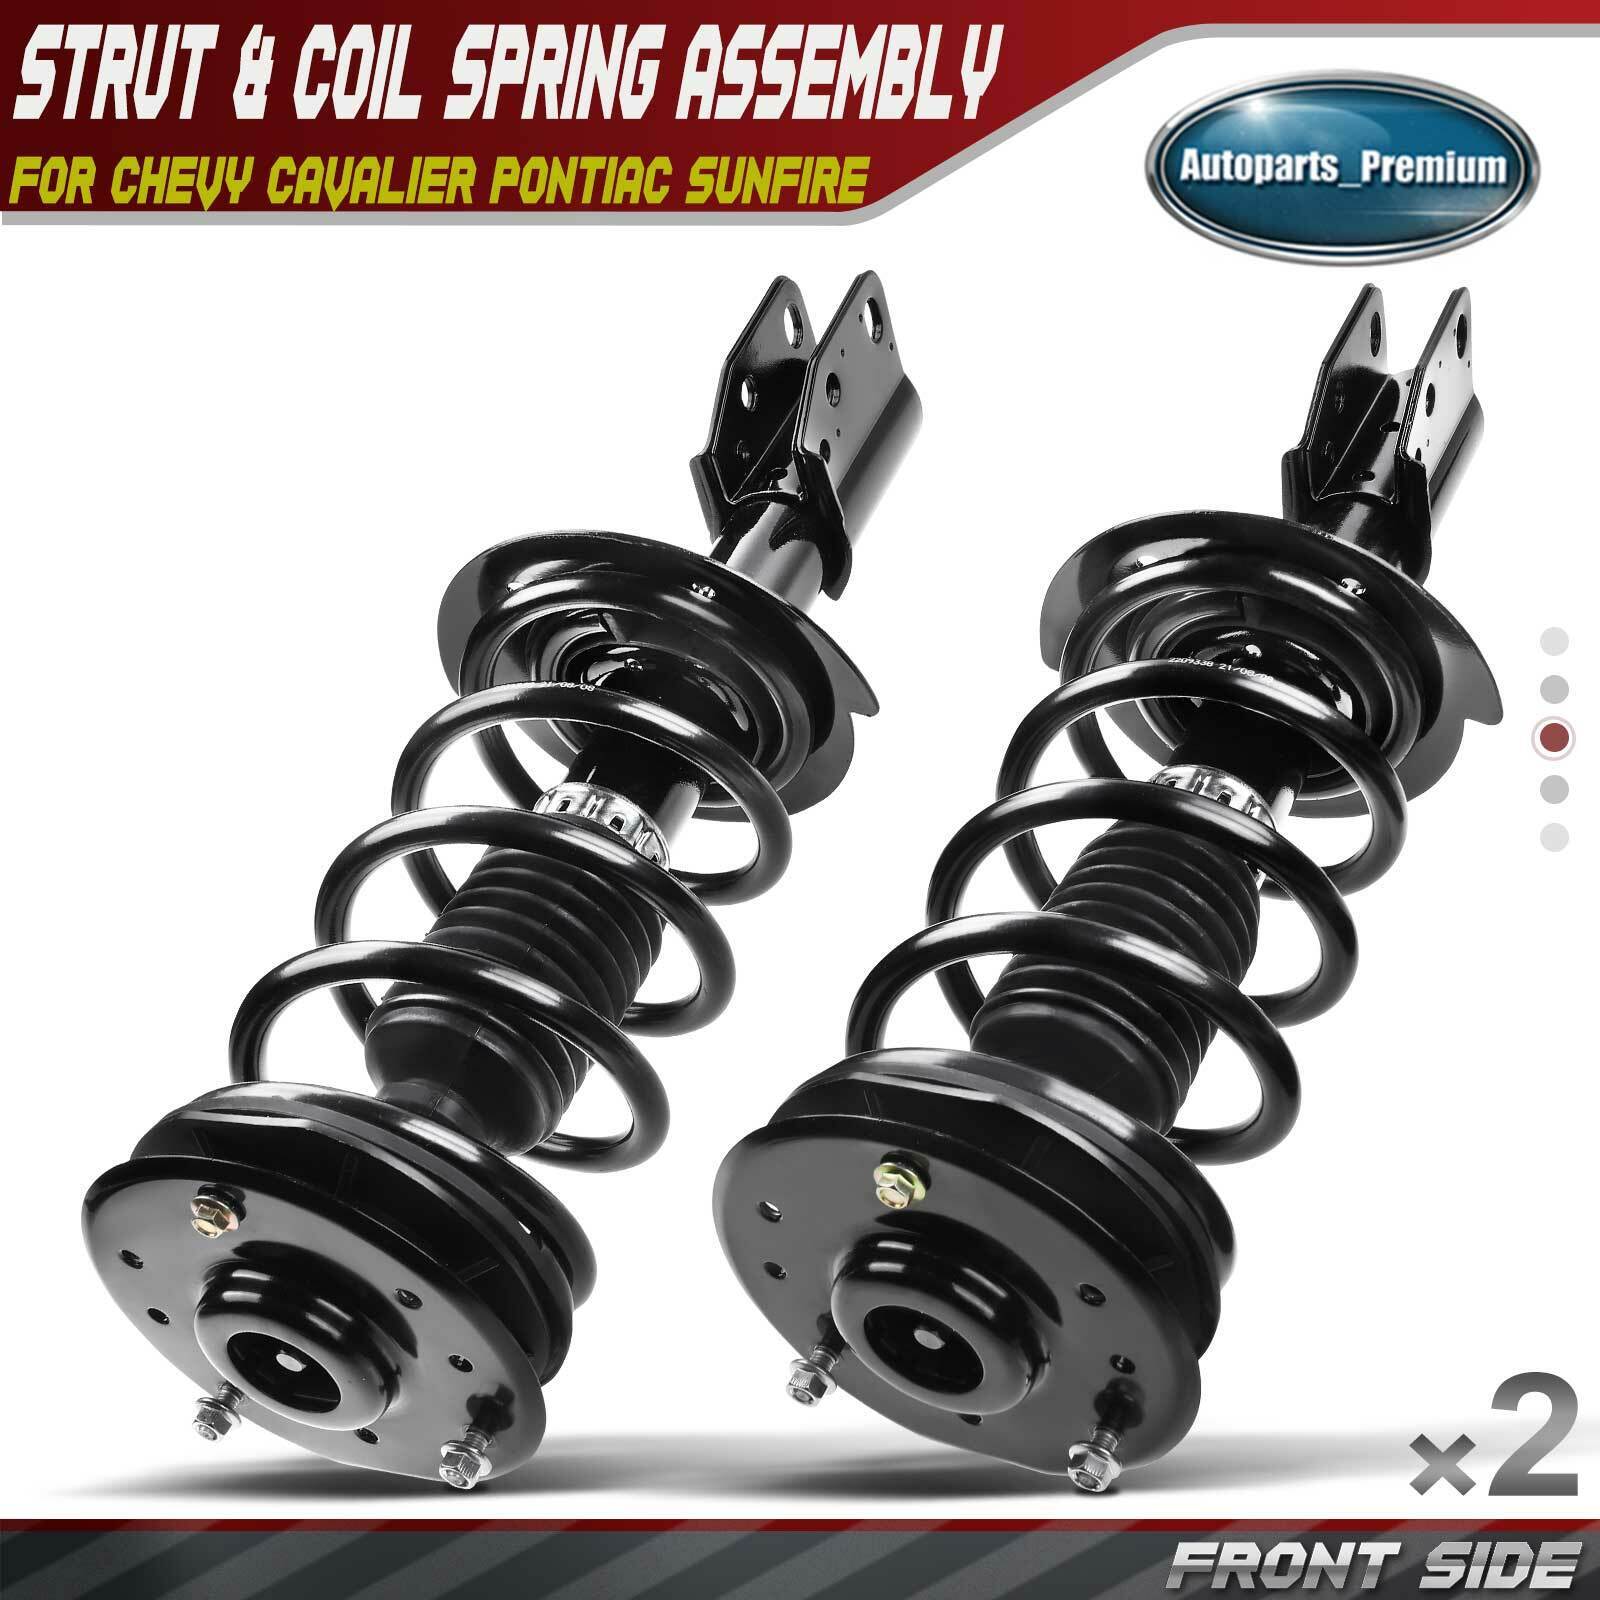 2x Front Left & Right Complete Strut & Coil Assembly for Chevrolet Pontiac 99-05